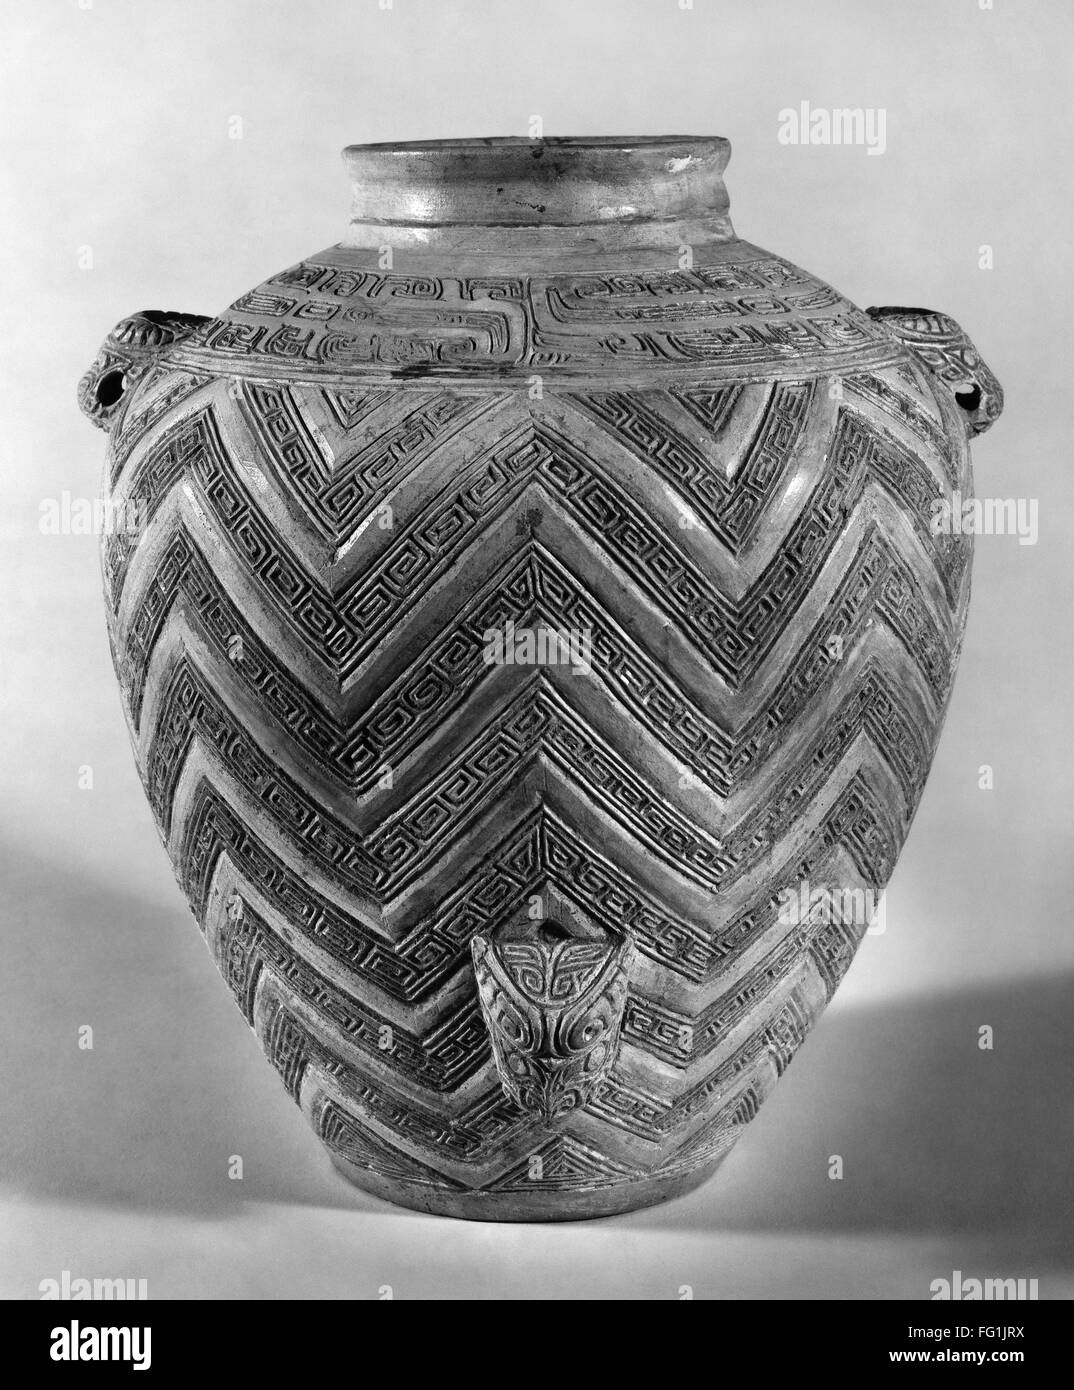 CHINA: POTTERY. /nUnglazed white pottery jar decorated with geometric shapes and dragons, from Anyang, China, made during the Late Shang dynasty, late 13th - early 12th century B.C. Stock Photo